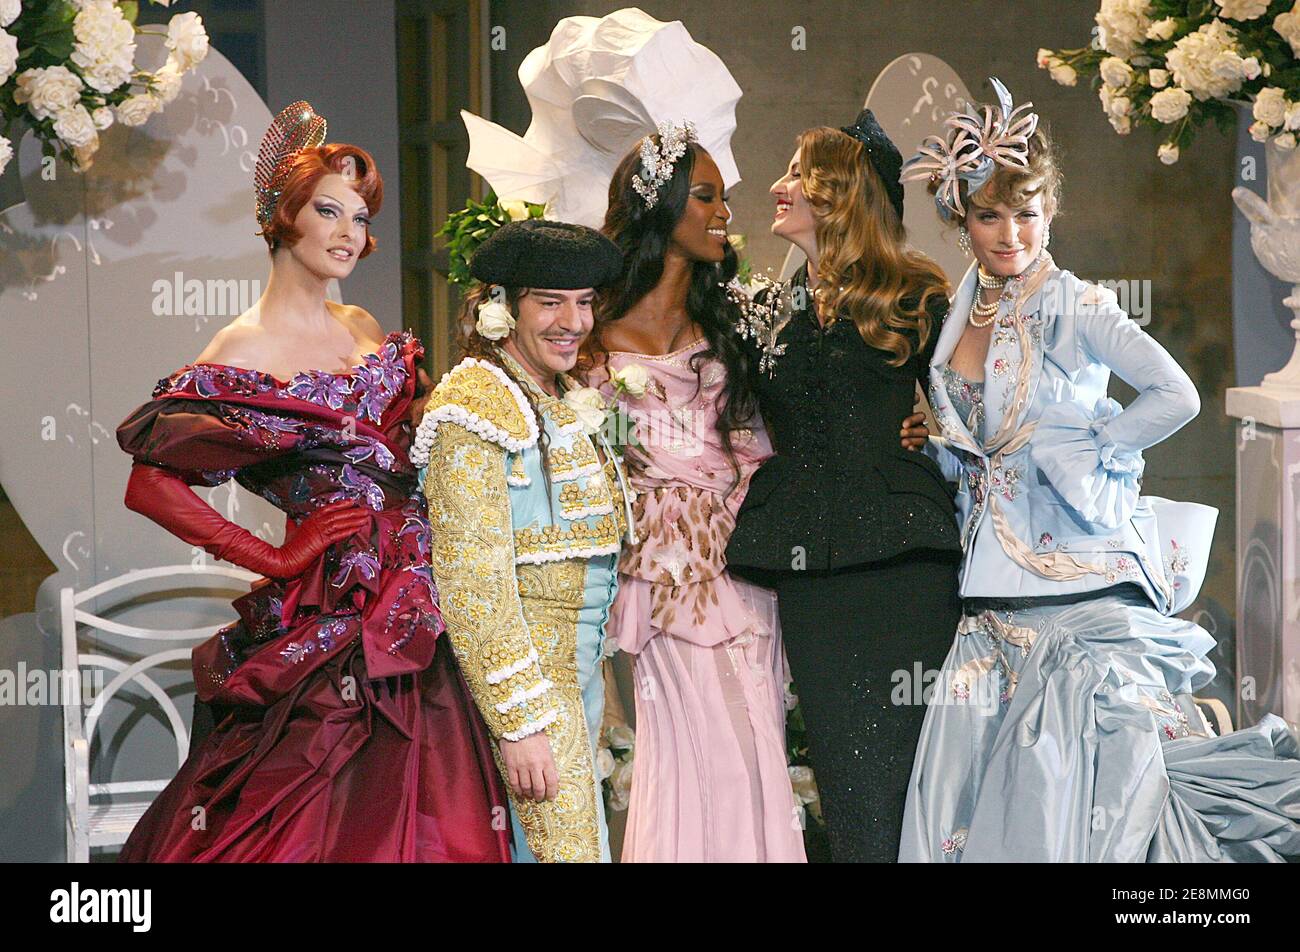 British designer John Galliano poses with Linda Evangelista (2ndL), Naomi Campbell (3rdL), Gisele Bundchen (2nd R) and Helena Christensen (1st R) at the end of for Christian Dior Fall-Winter 2007-2008 Haute-Couture collection show, in Versailles, France on July 2, 2007. The prestigious fashion house of Christian Dior is celebrating its 60th birthday this week and John Galliano his 10th year as Dior's designer. Photo by Nebinger-Orban-Taamallah/ABACAPRESS.COM Stock Photo